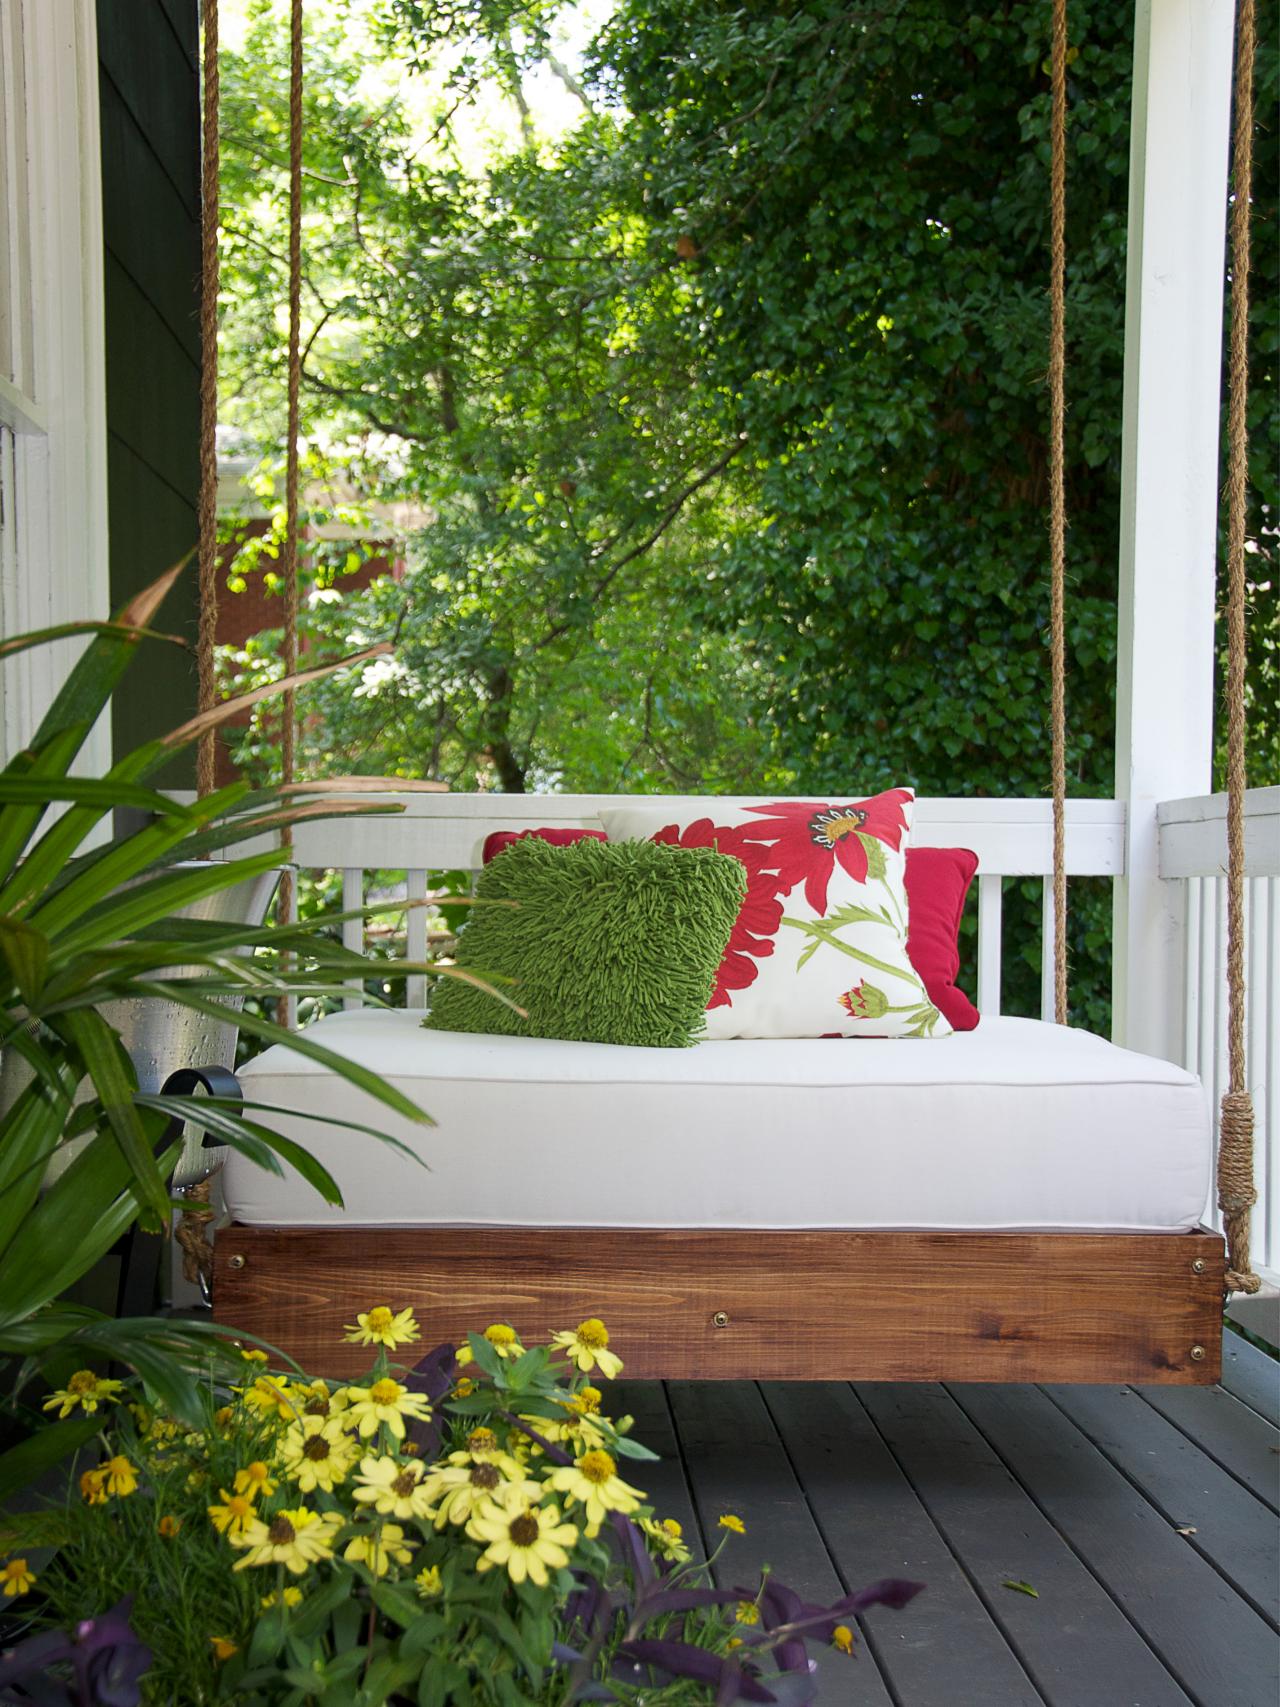 Shabby Chic Outdoor Decorating Ideas for Porches